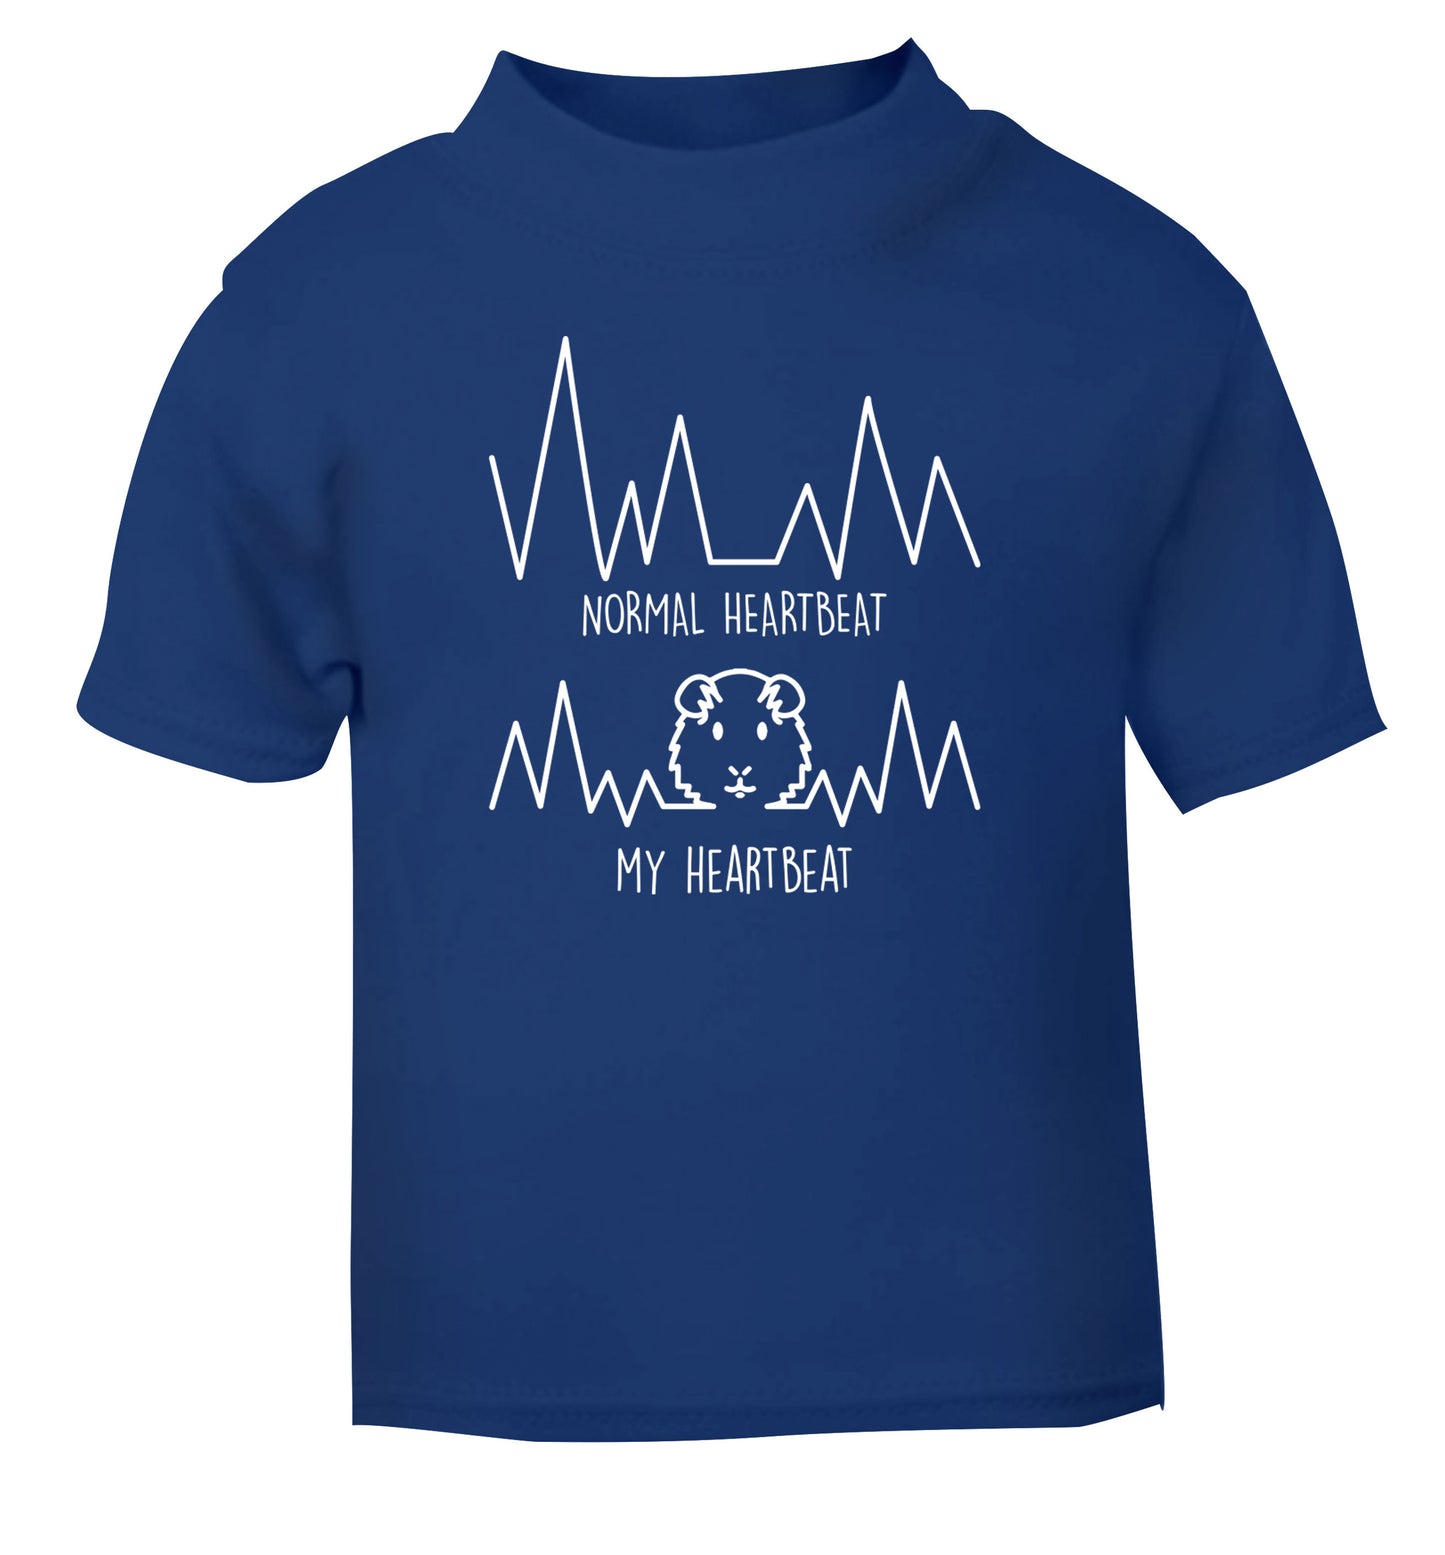 Normal heartbeat vs my heartbeat guinea pig lover blue Baby Toddler Tshirt 2 Years